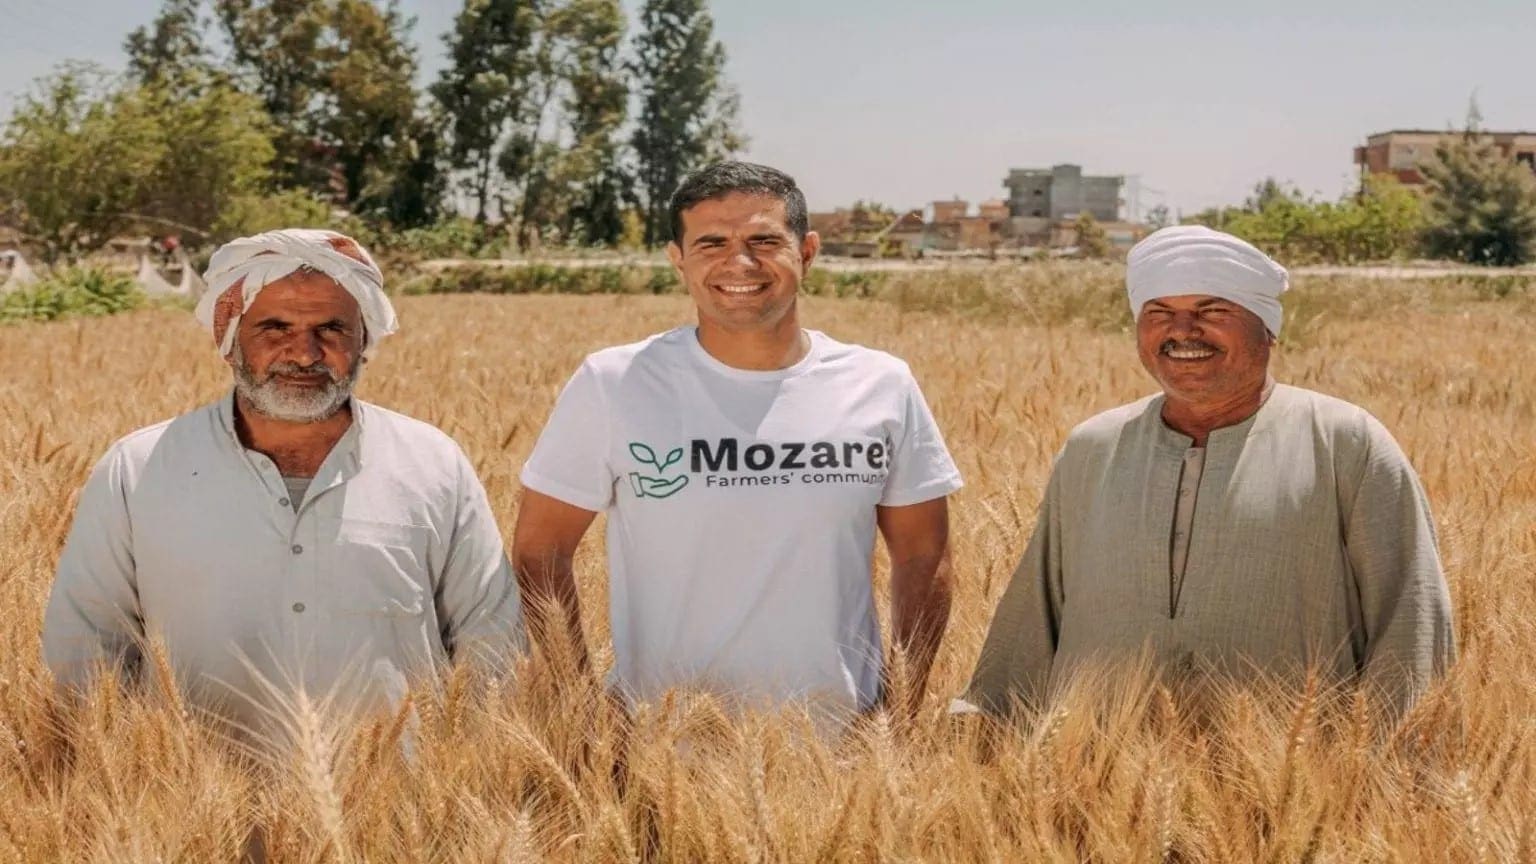 Egypt based Agri-Fintech Mozare3 closes pre-seed funding round led by Algebra Ventures